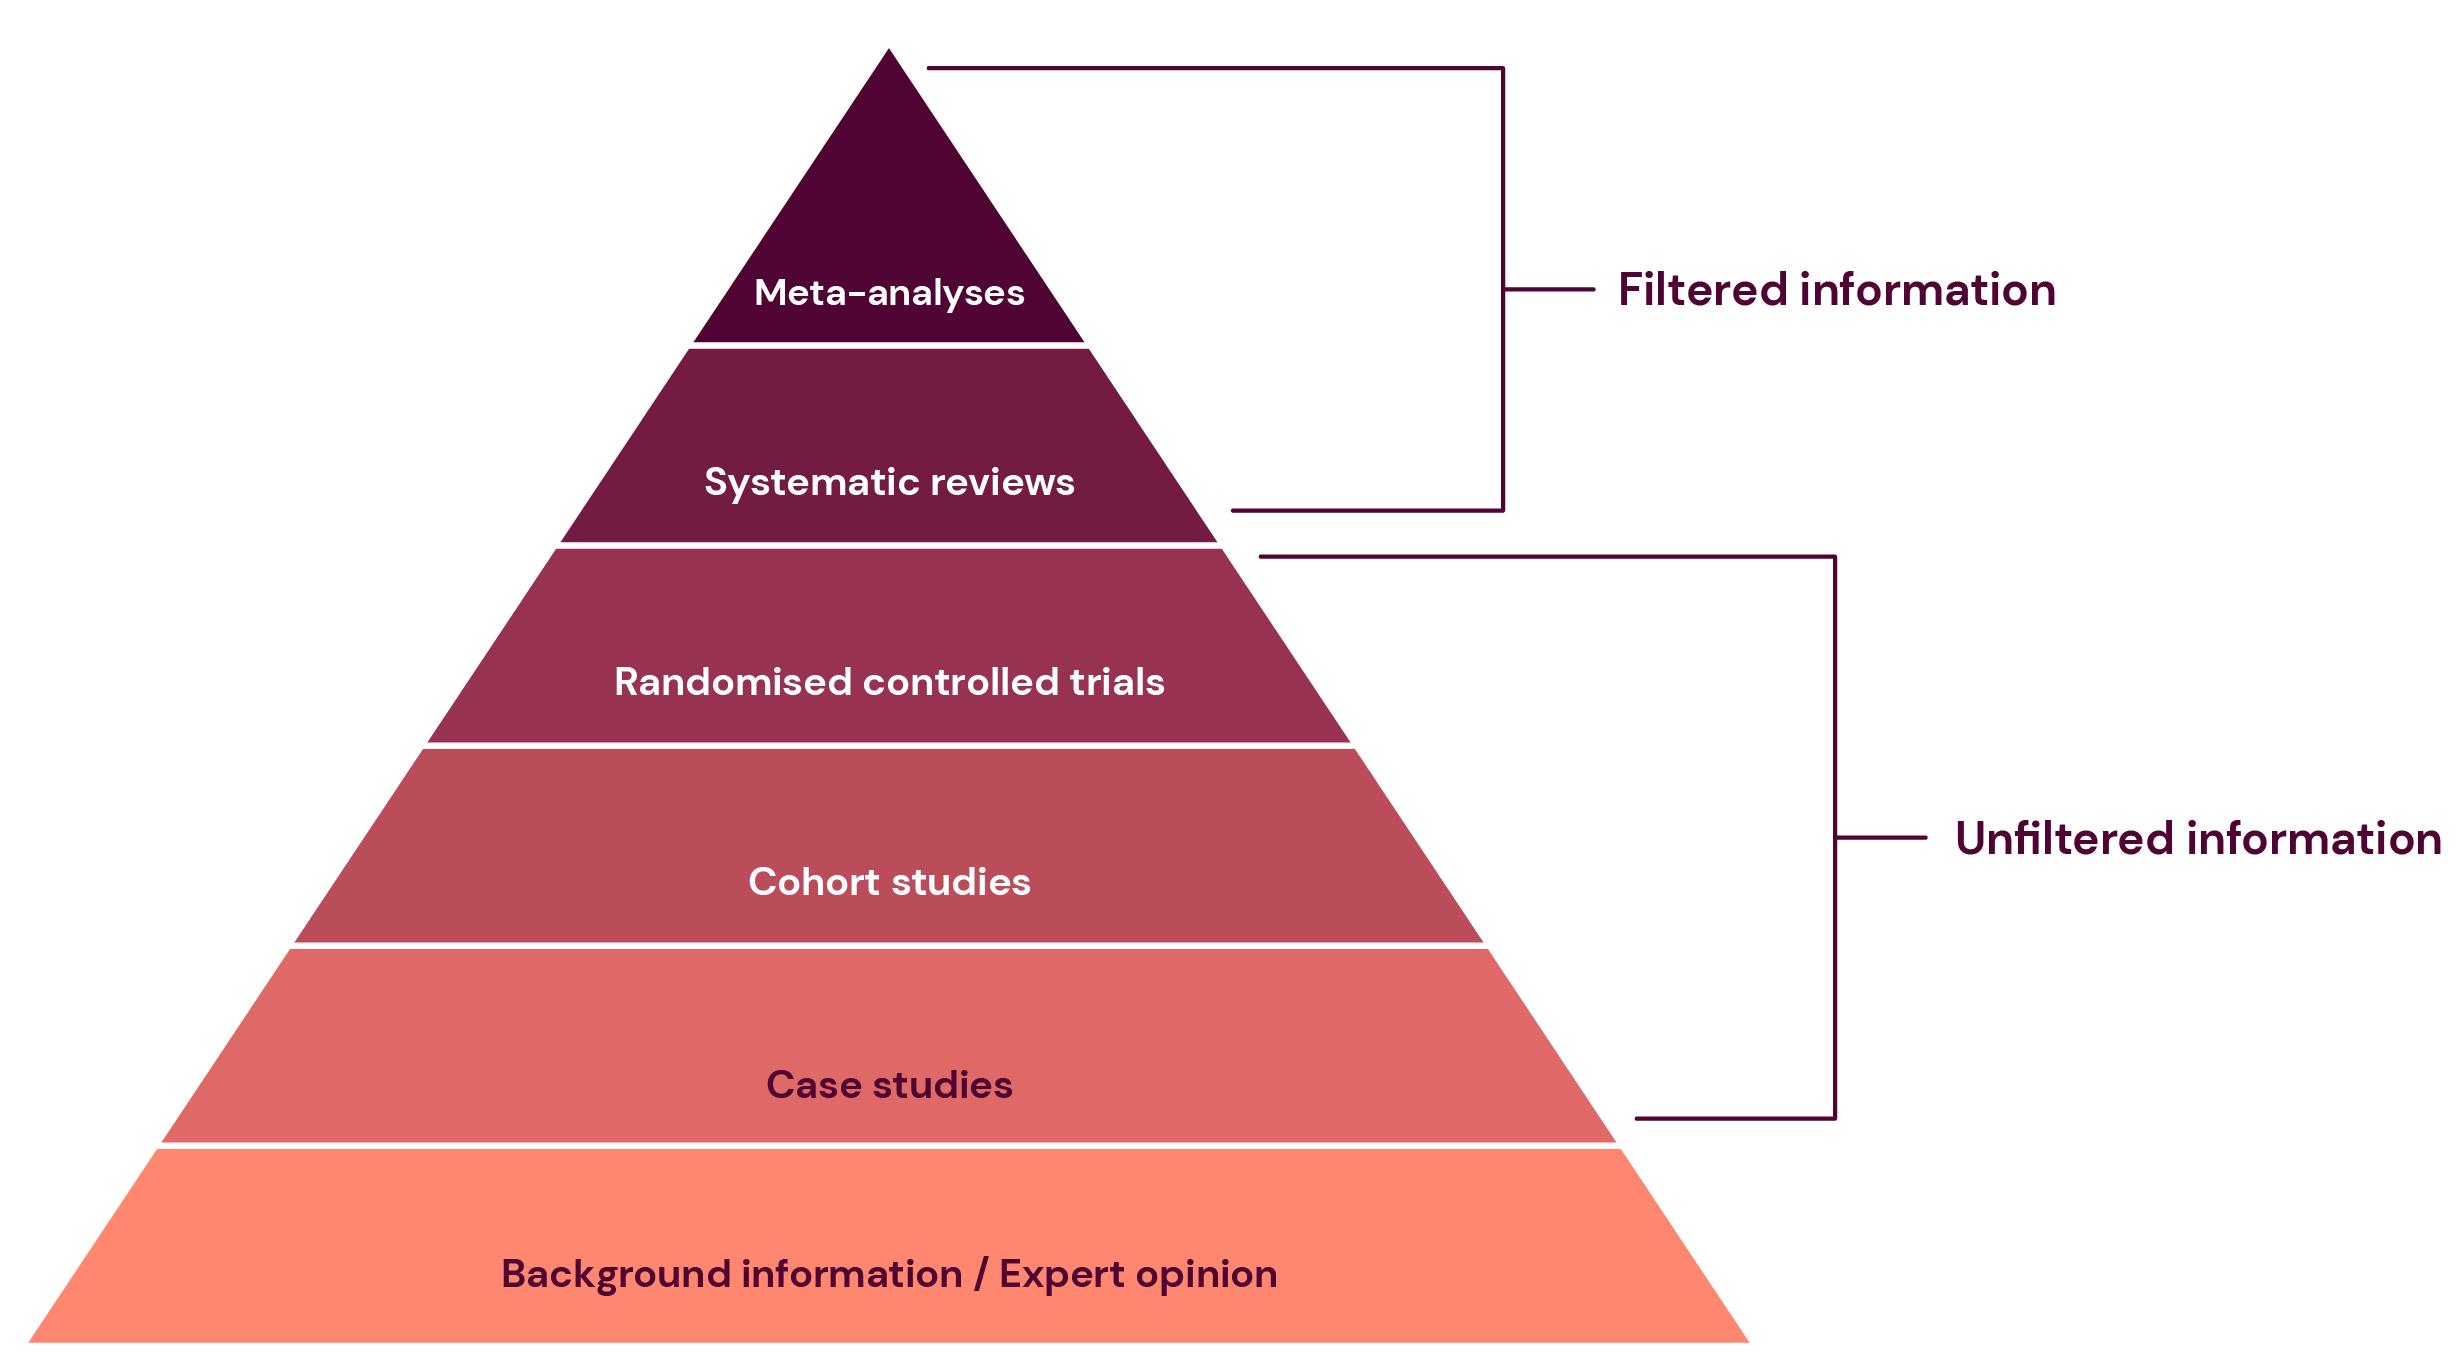 Pyramid with 6 levels. Top: Meta-analyses and Systematic reviews (filtered information). Below Randomised controlled trials, Cohort studies and Case studies (unfiltered). Bottom: Background information or Expert opinion.